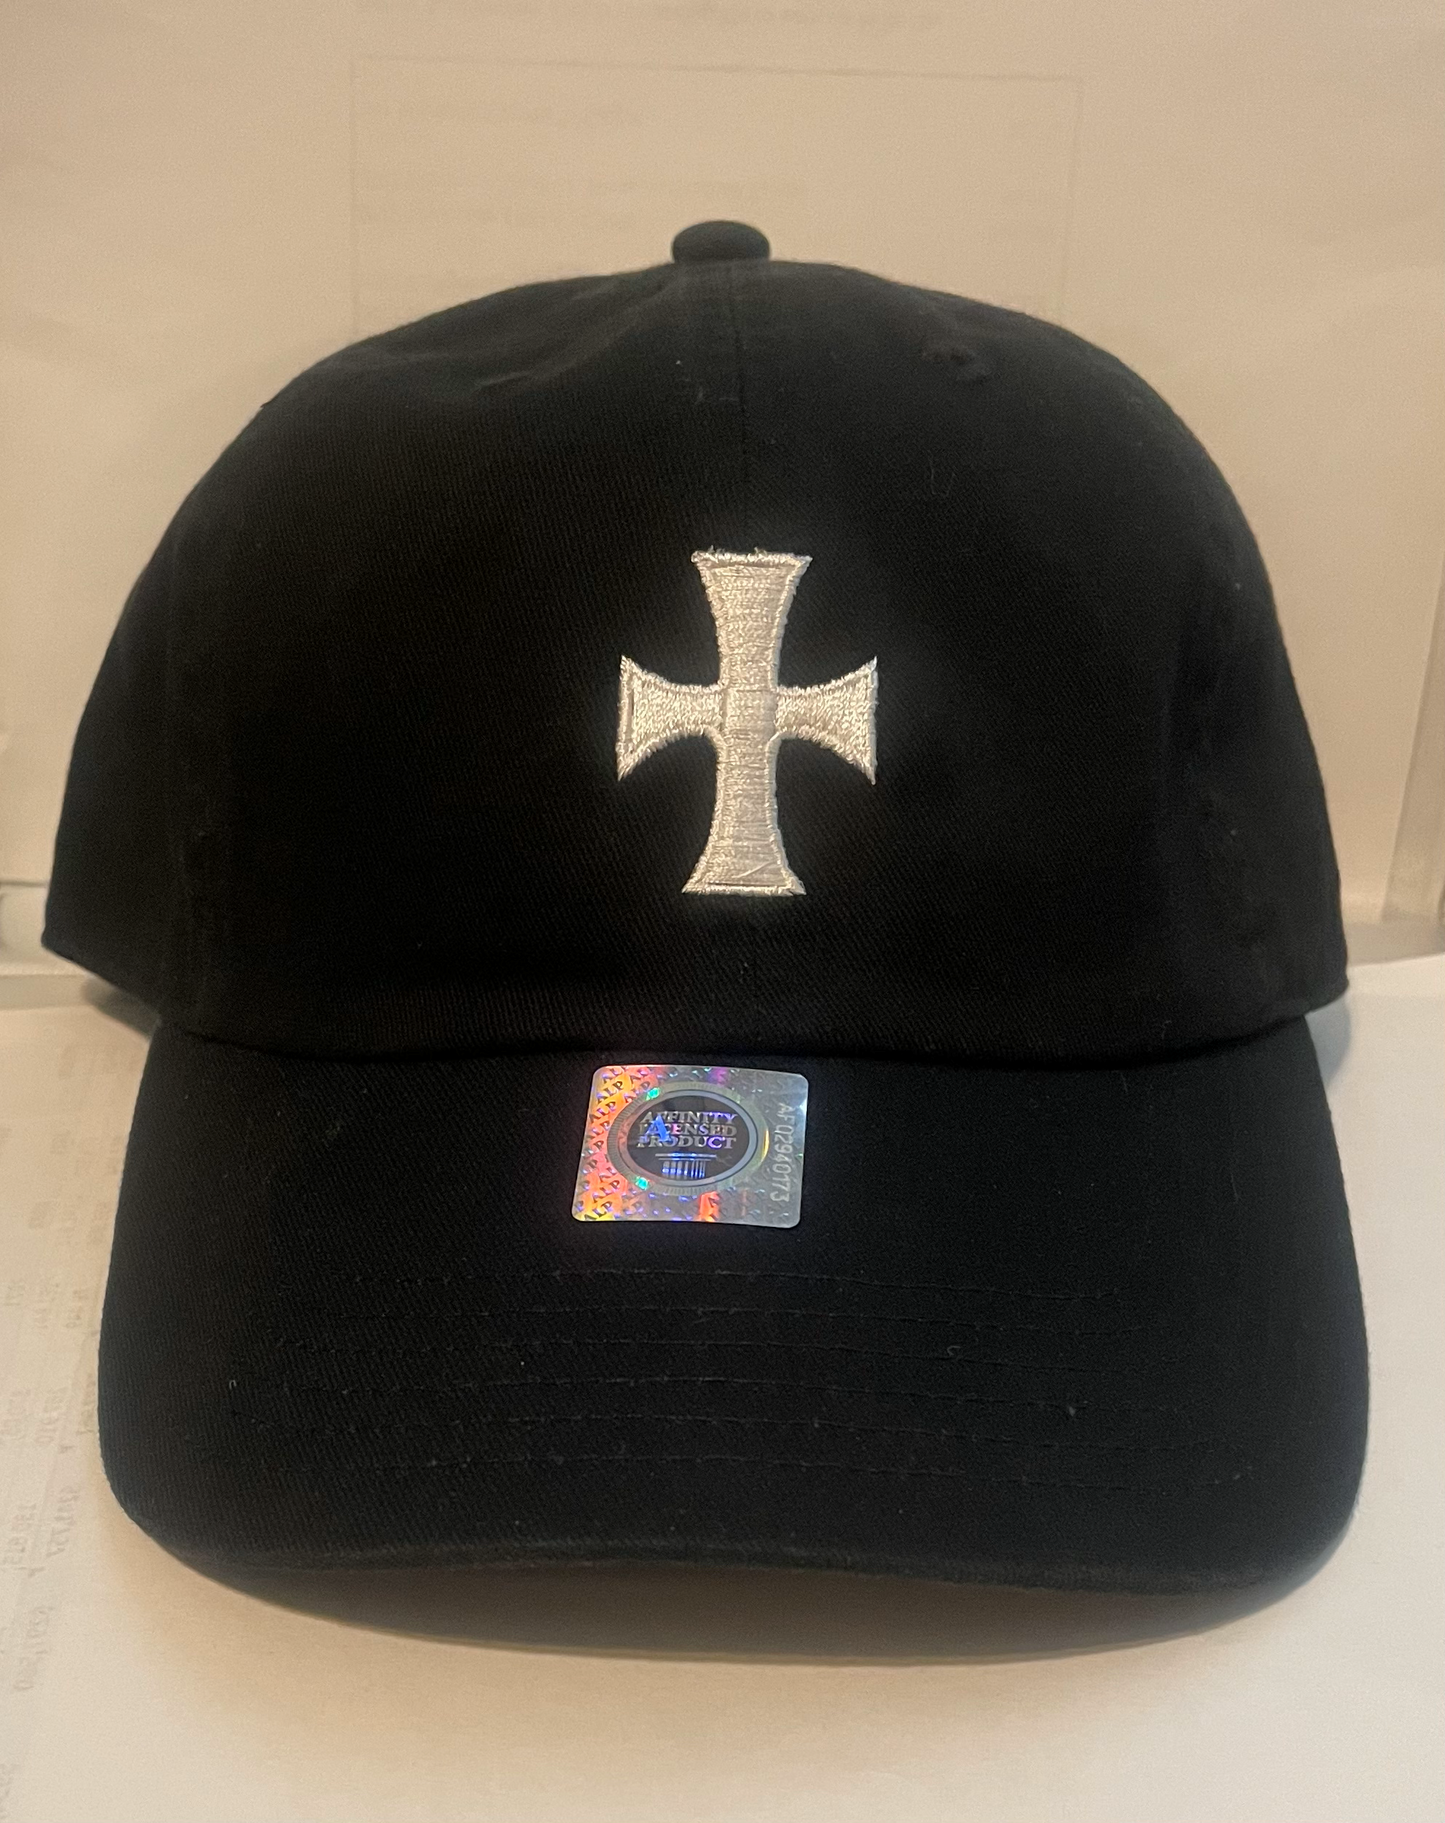 '62 White Cross - Unconstructed/Dad Hat Black